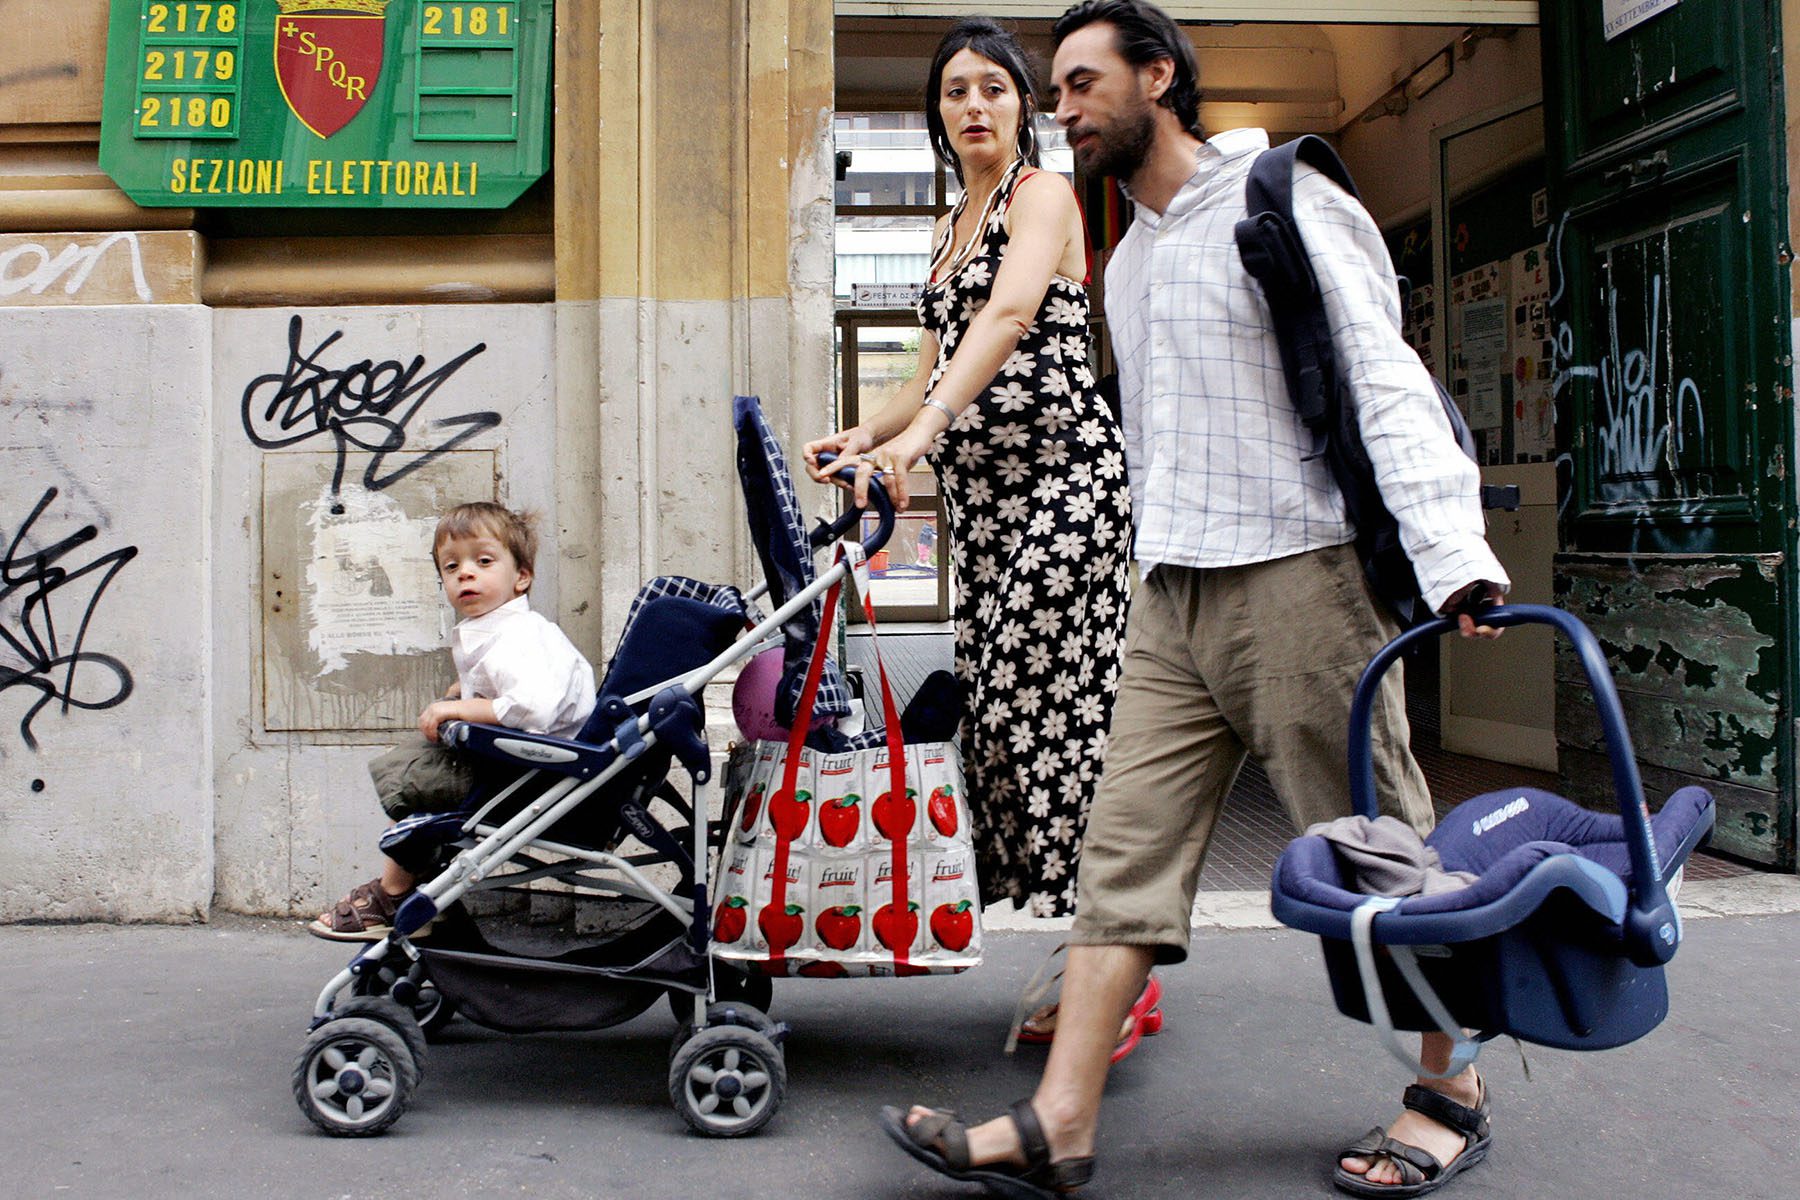 A woman pushes a stroller with a small child on board as she speaks to a man holding a baby carrier.